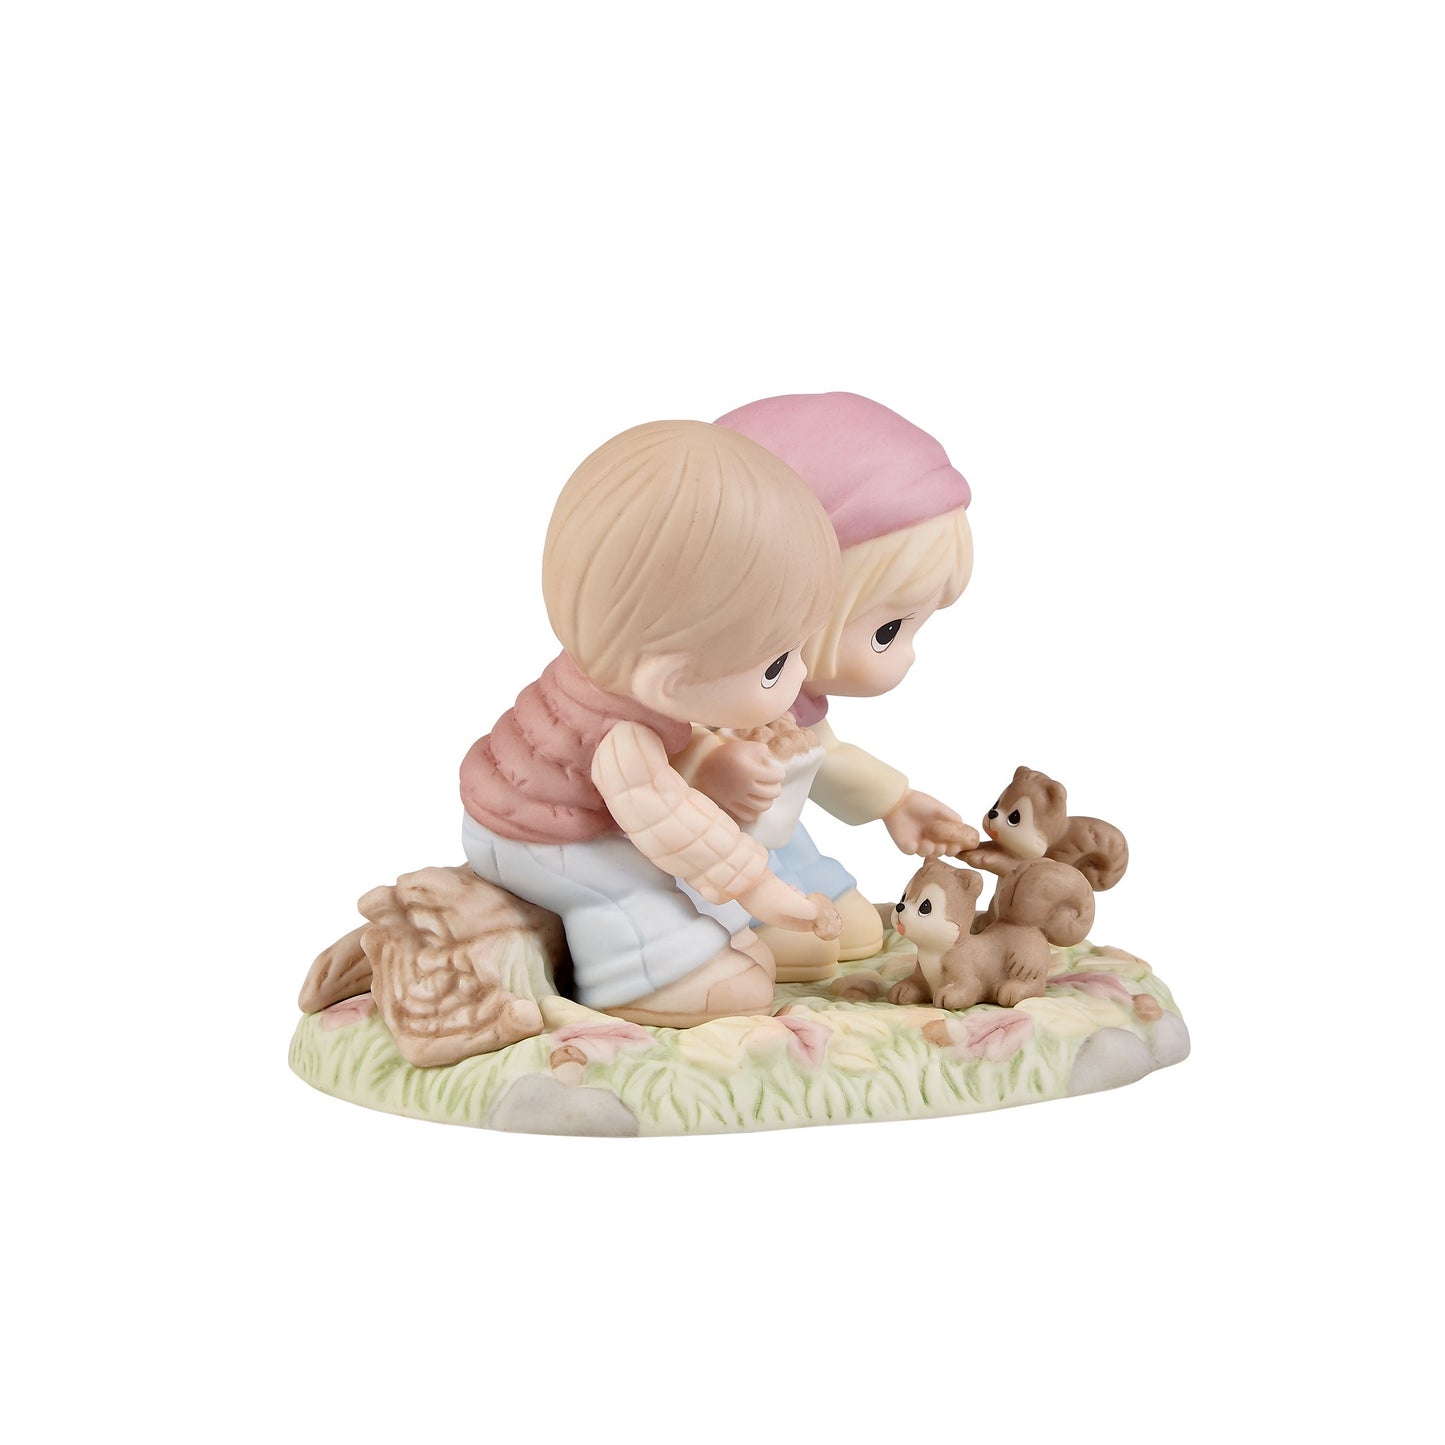 I'm Nuts About You Figurine by Precious Moments